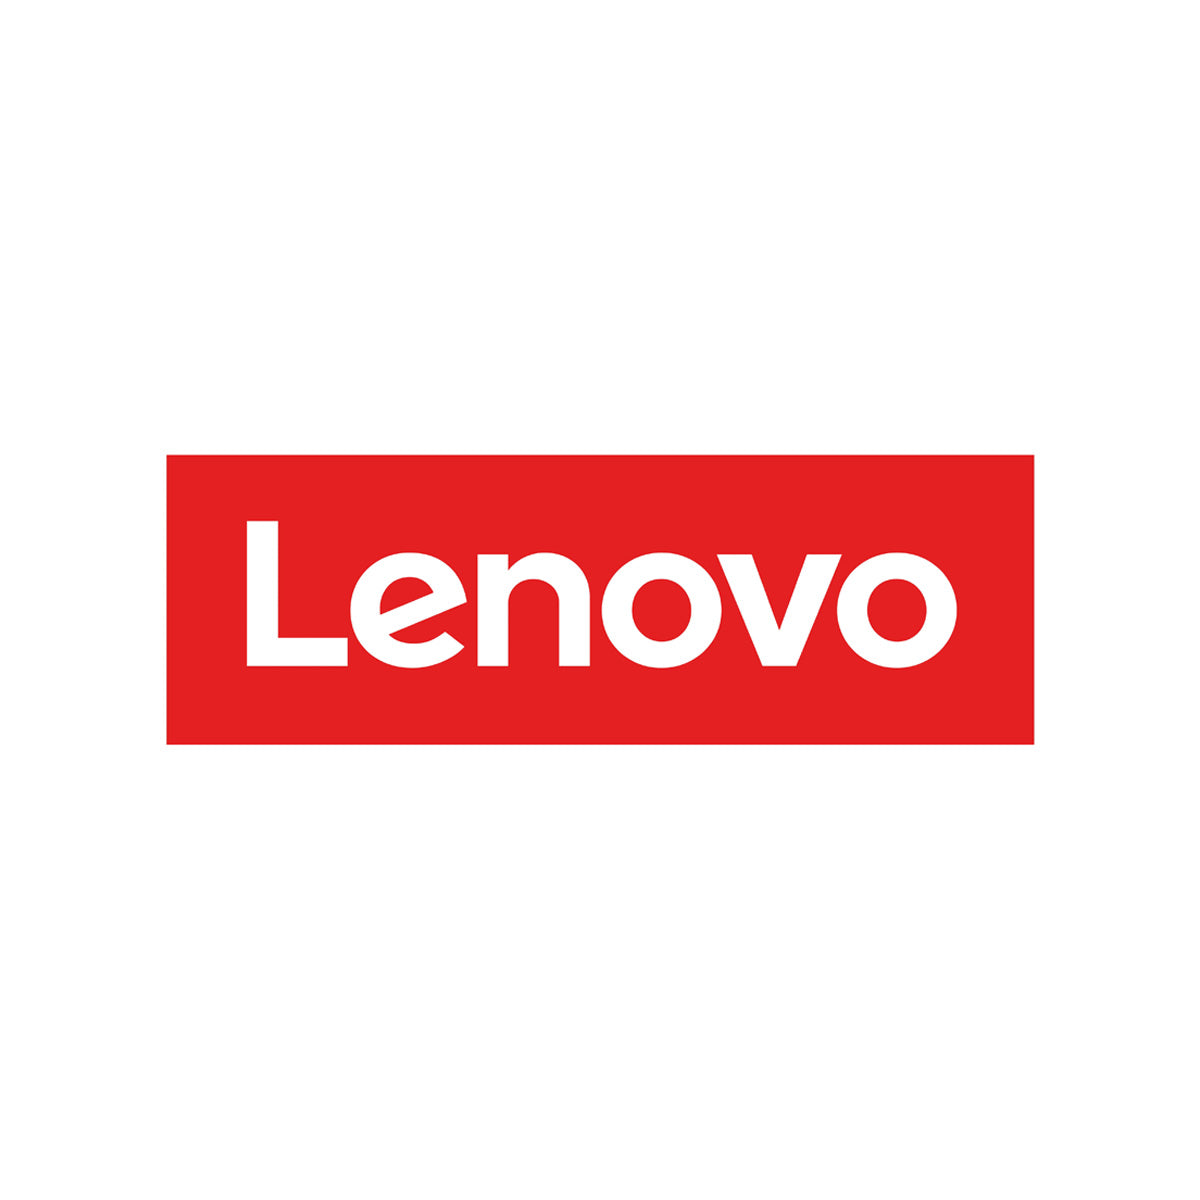 Lenovo All-In-One Computers